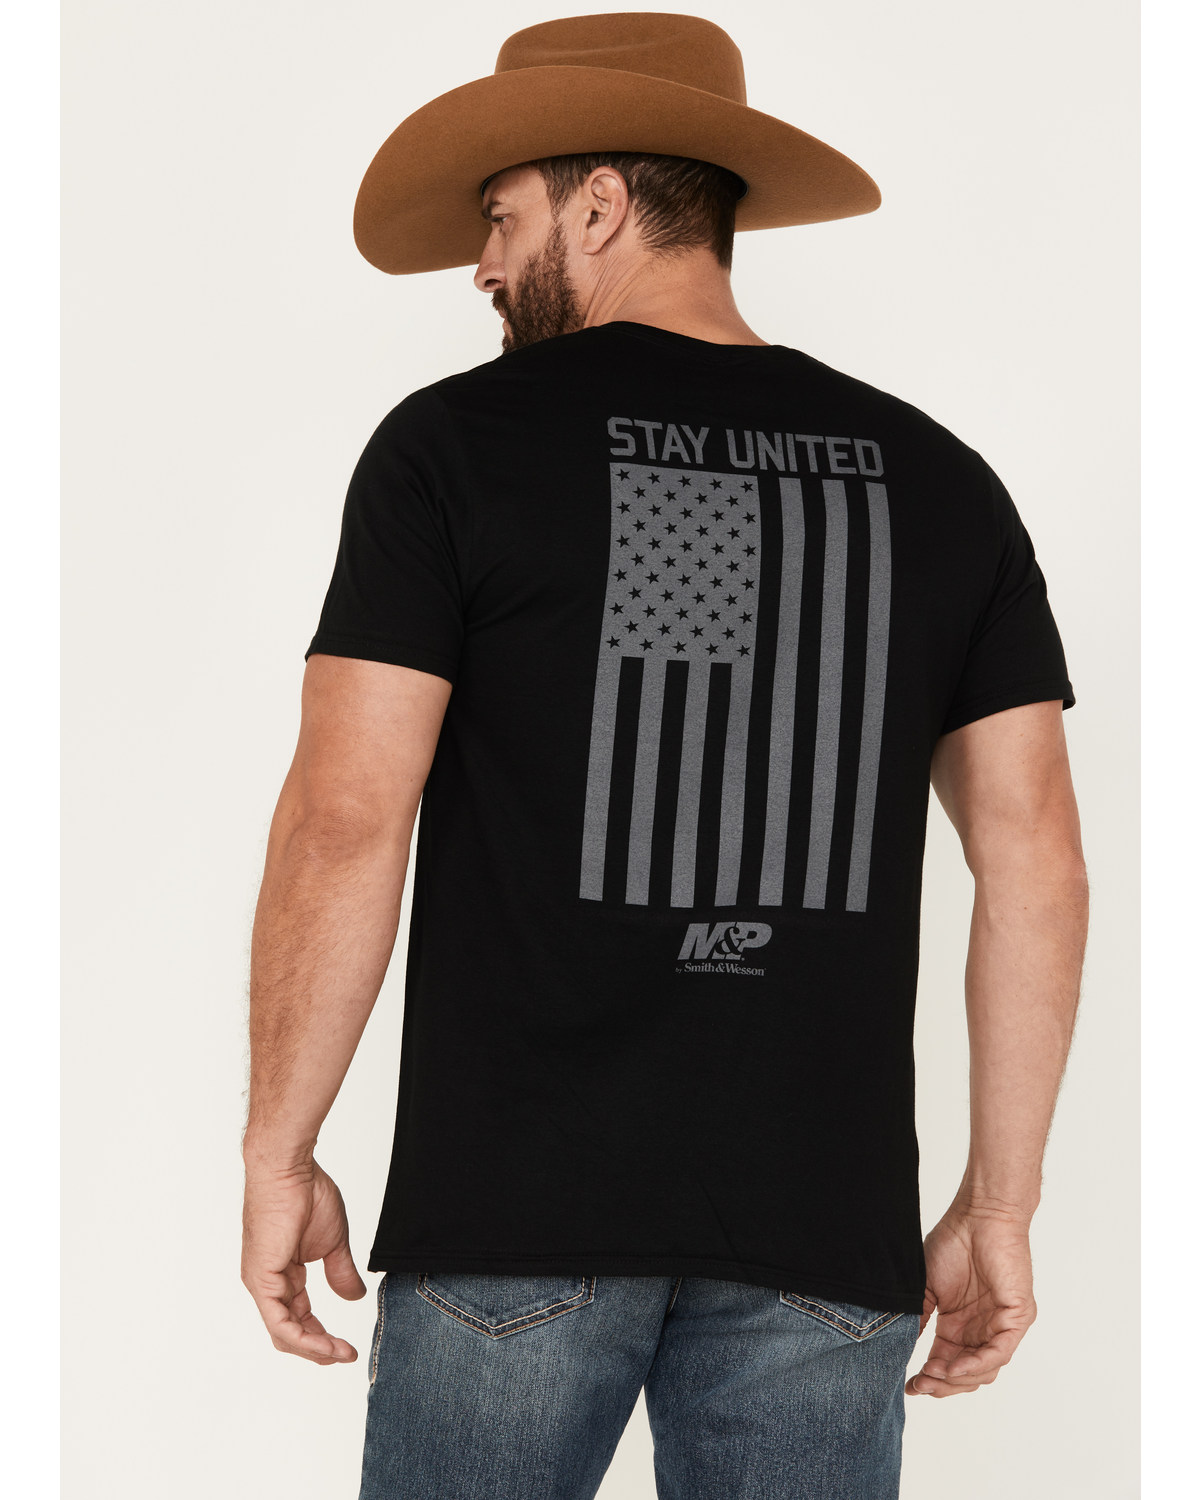 Smith & Wesson Men's M&P Stay United Flag Short Sleeve Graphic T-Shirt